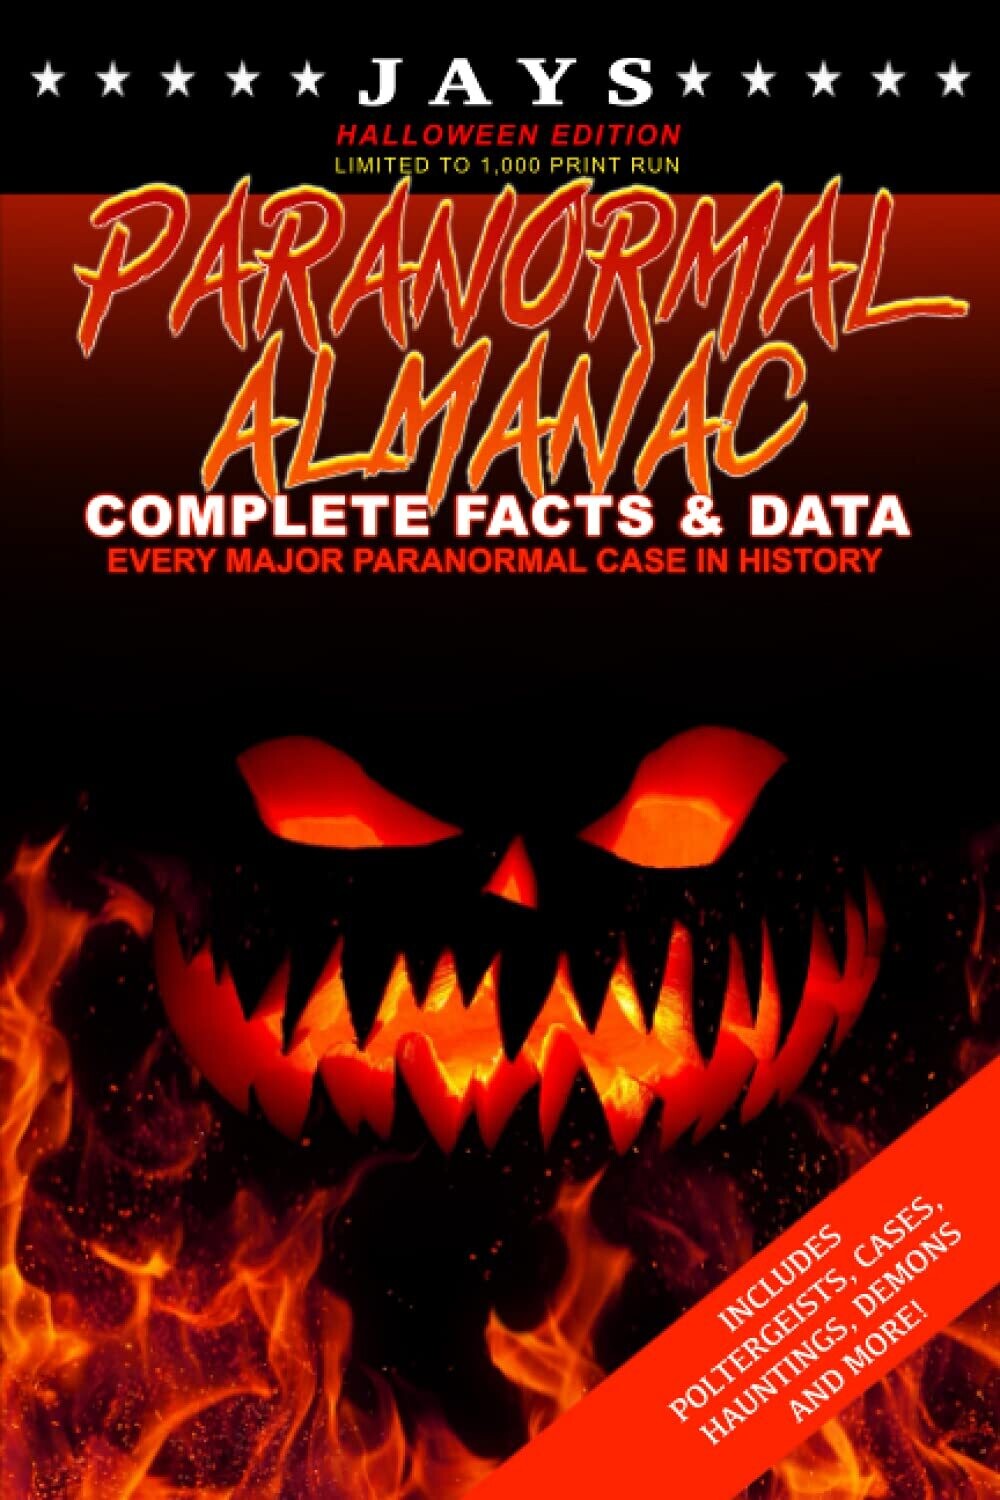 Jays Paranormal Almanac: Complete Facts & Data [#9 HALLOWEEN EDITION - LIMITED TO 1,000 PRINT RUN WORLDWIDE] [Paperback]